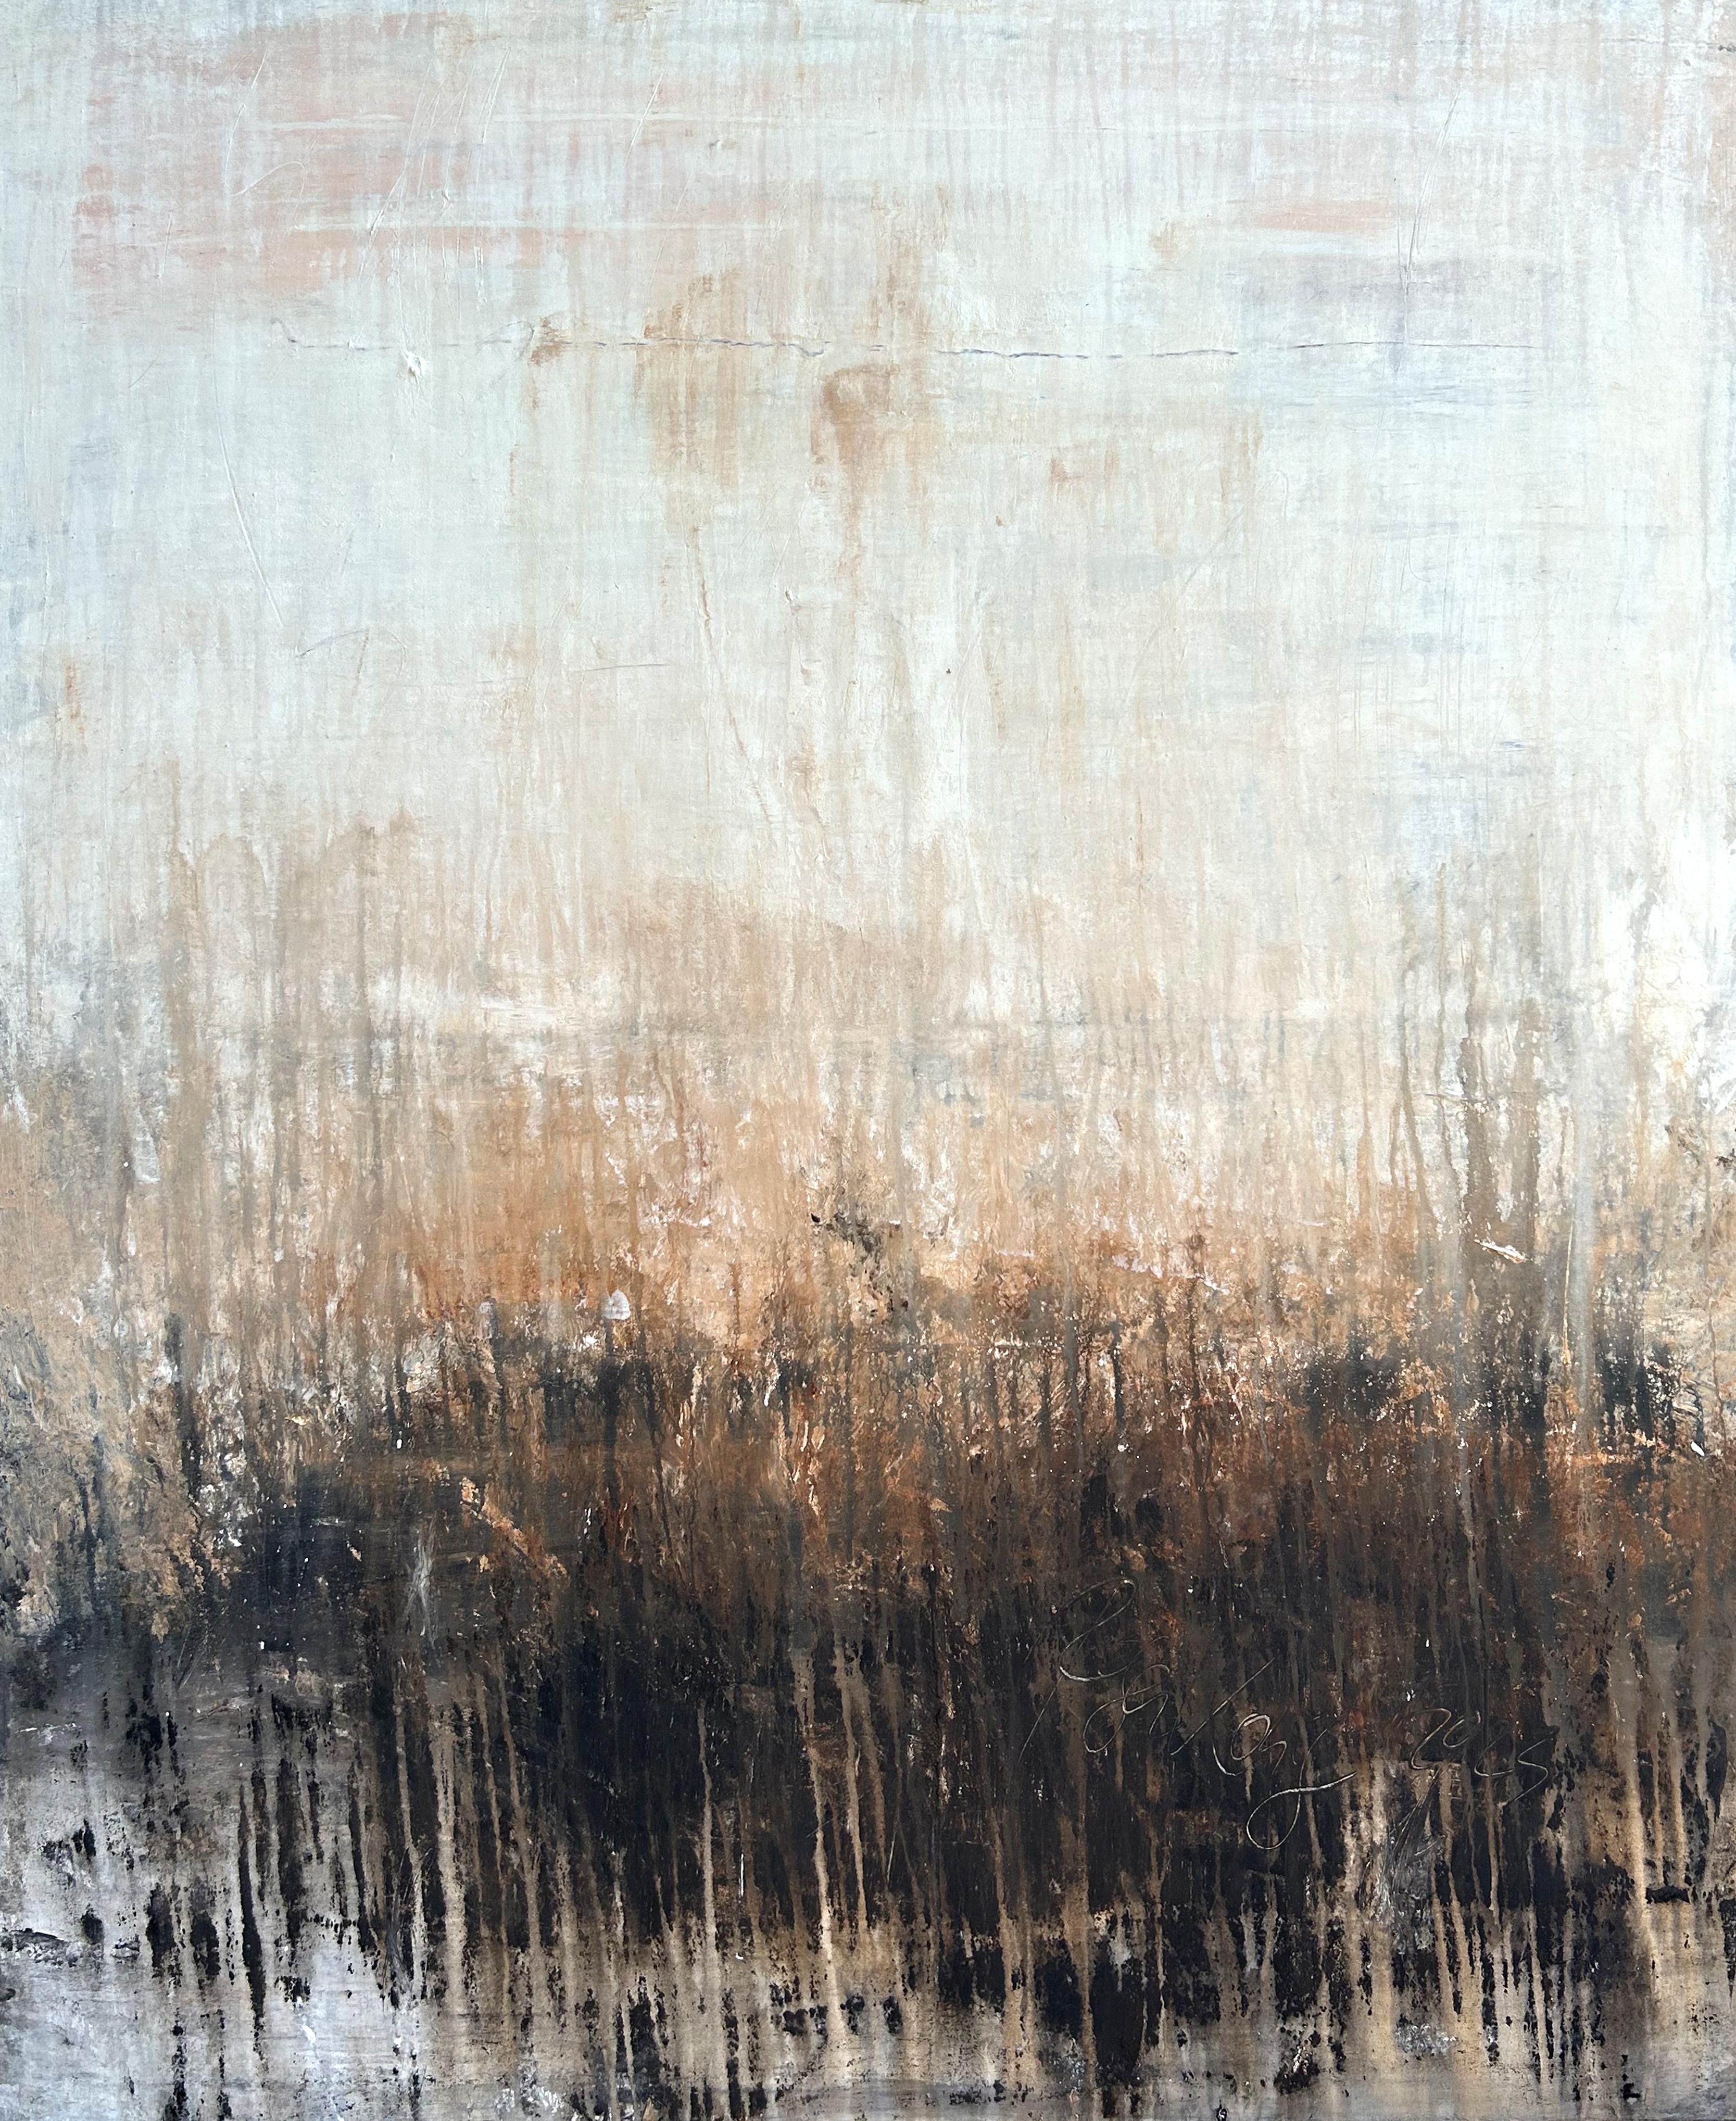 Roger König Landscape Painting - *Antique Exclusive Wall Series" RR34K, Abstract Painting , 21st Century, Acrylic